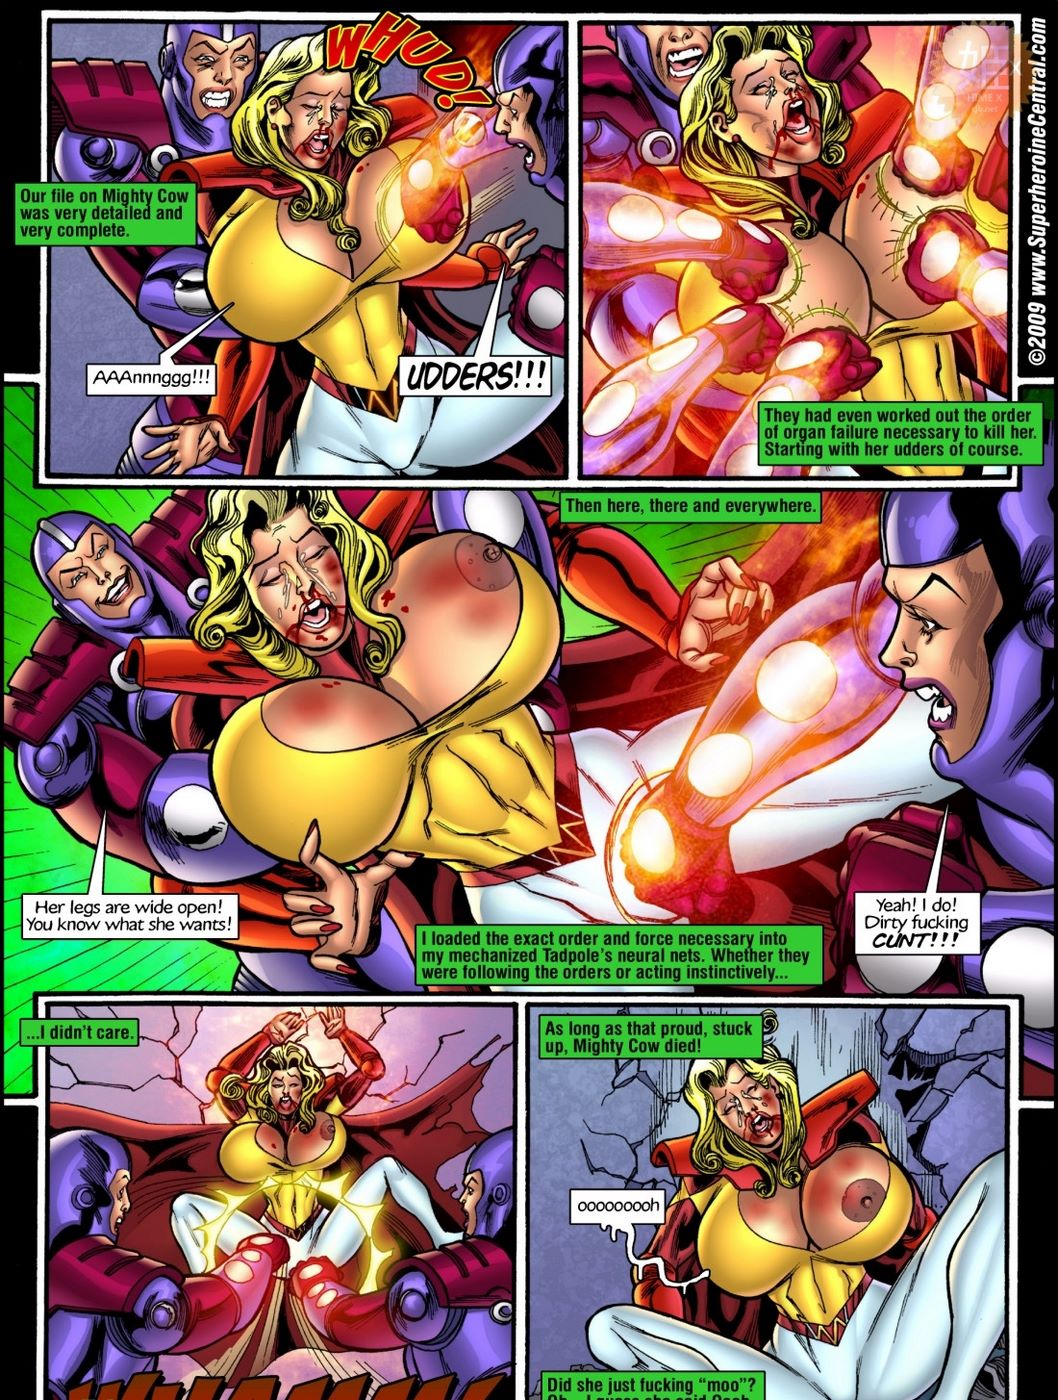 Superheroine Central- Mighty cow - part 4